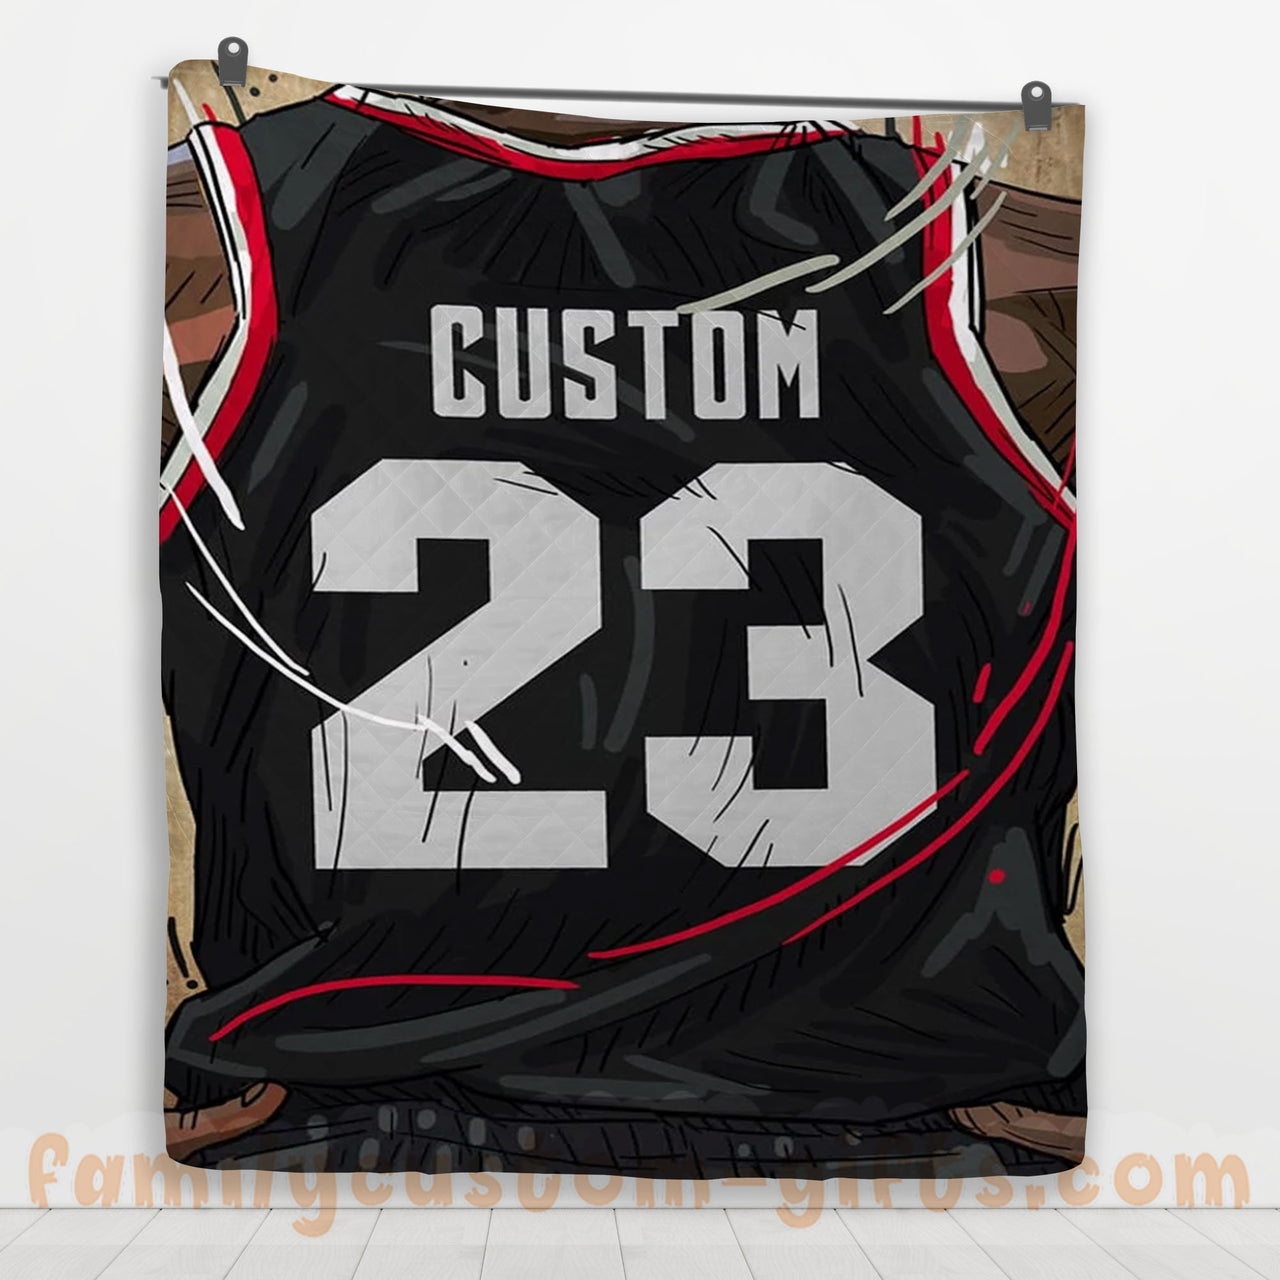 Custom Premium Quilt Blanket Portland Jersey Basketball Personalized Quilt Gifts for Her & Him